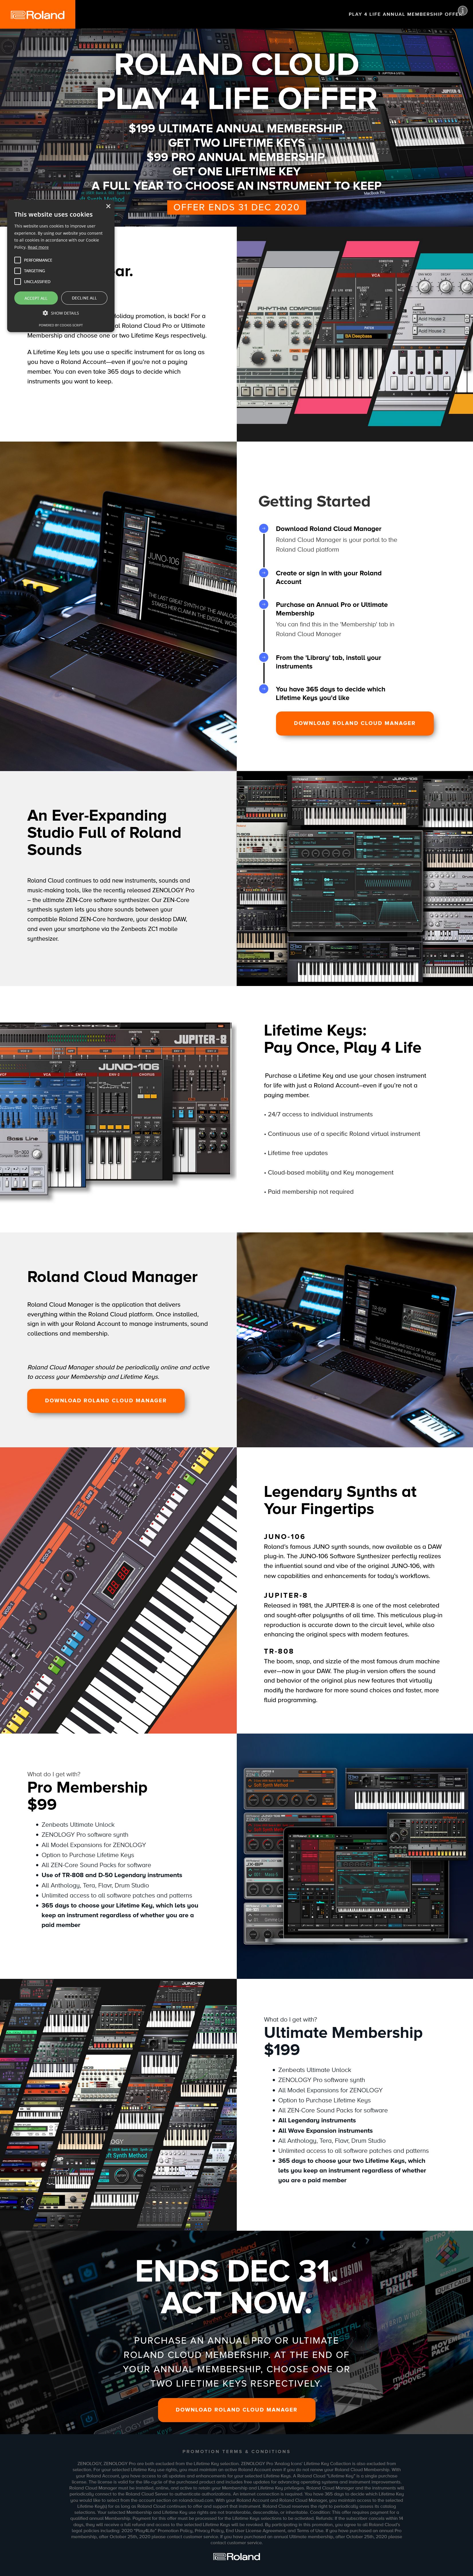 Roland Cloud Play for Life Offer.jpg